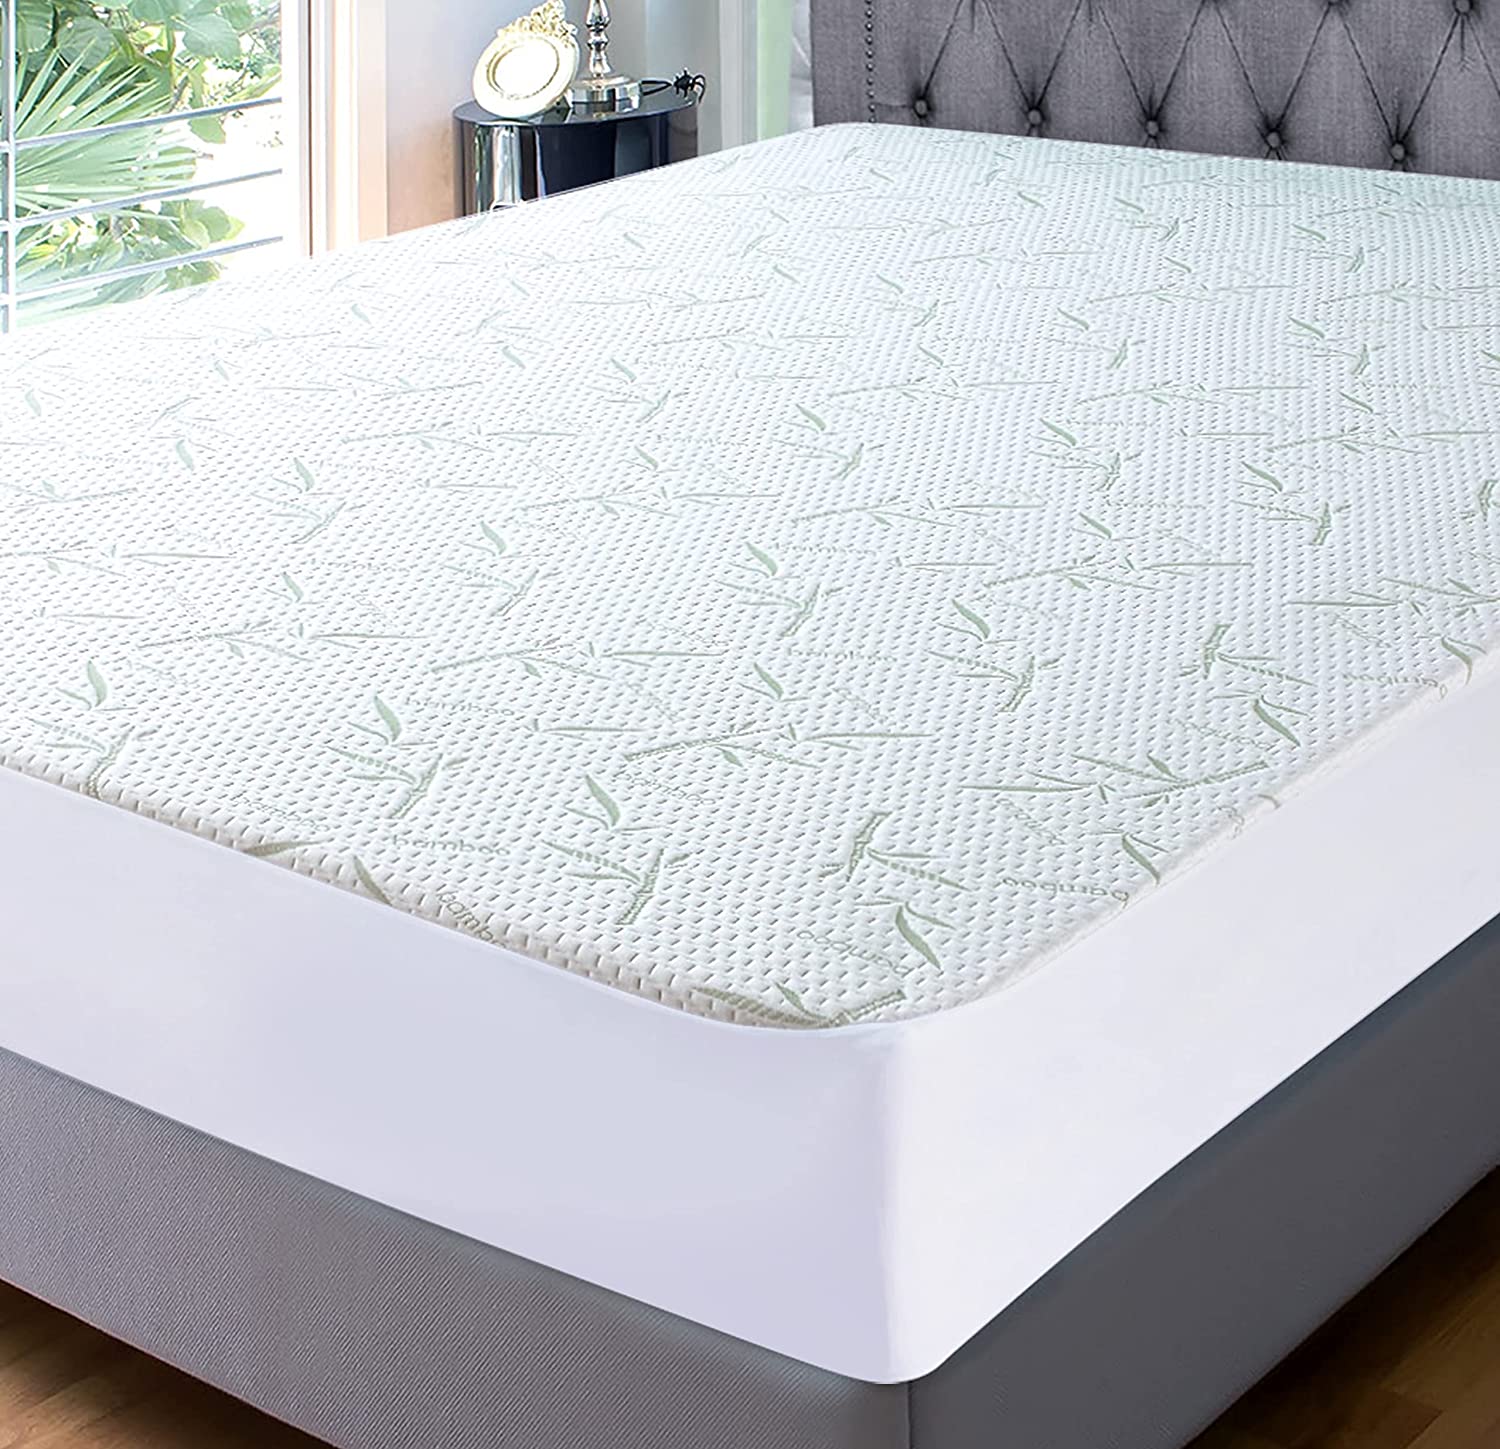 Bamboo Mattress Protector King Size - Breathable Waterproof Mattress Cover-Hypoallergenic  - Fitted Cover with Cooling Fabric - Pillow Top Mattress Pad Deep Pocket 